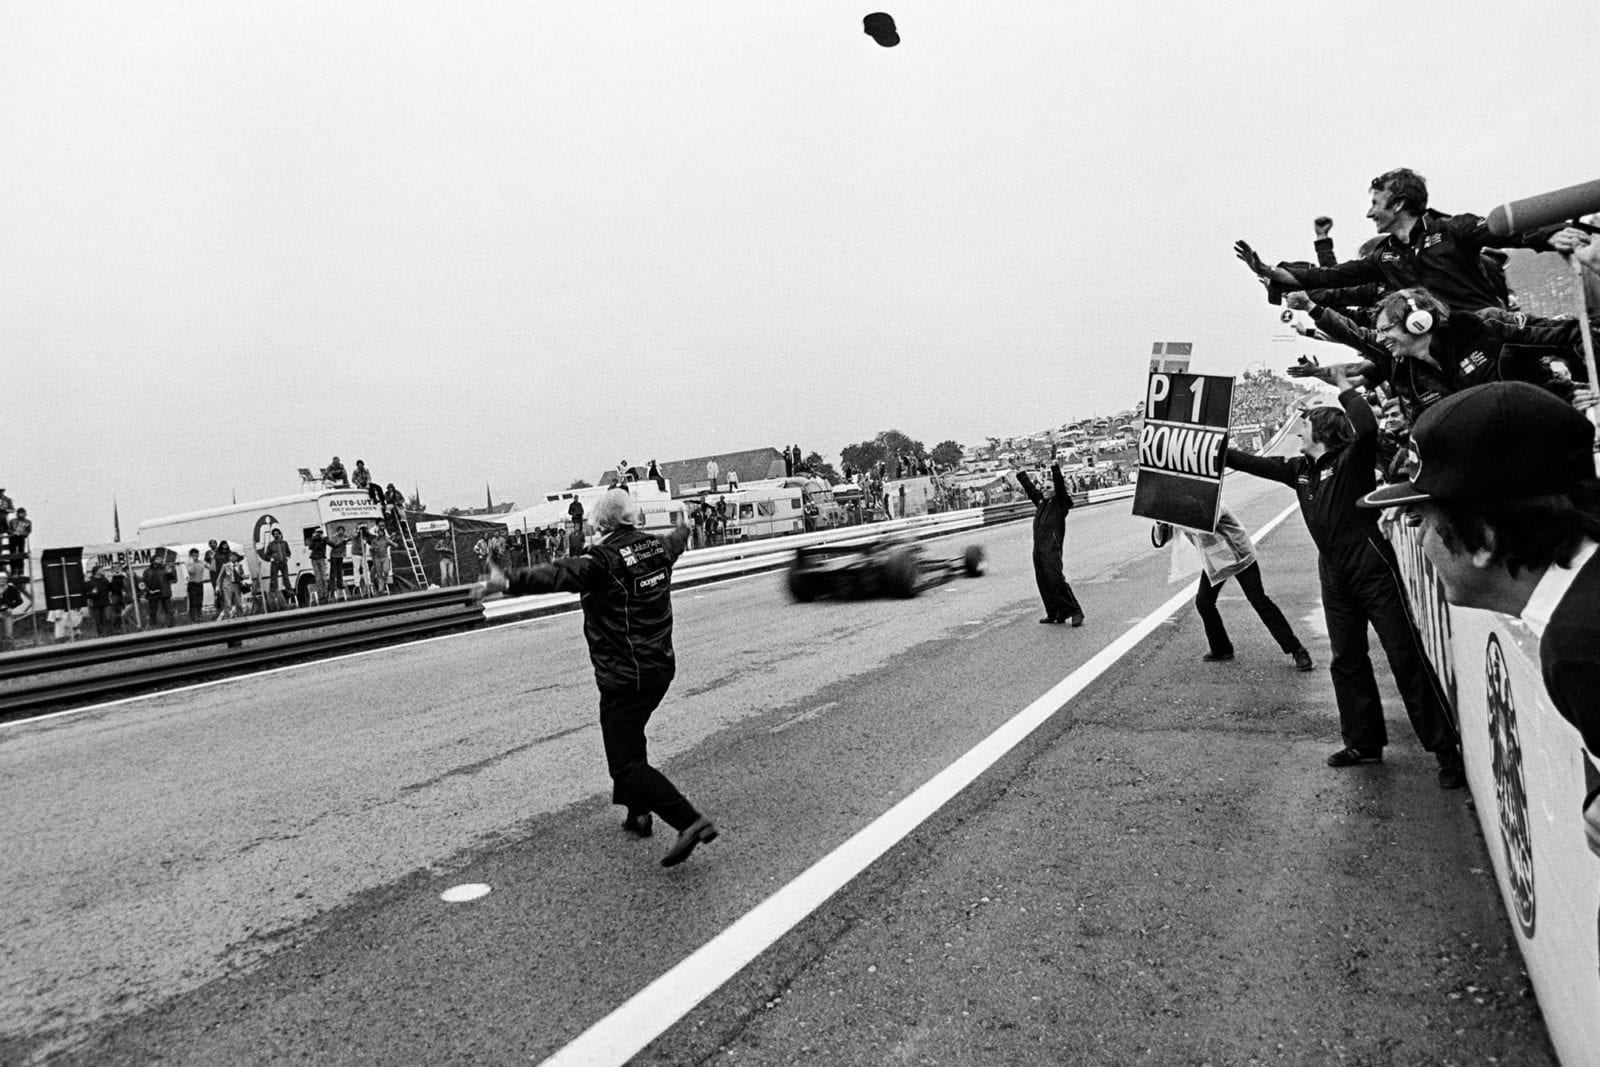 ROnnie Peterson (Lotus) passes the finish line to win the 1978 Austrian Grand Prix.